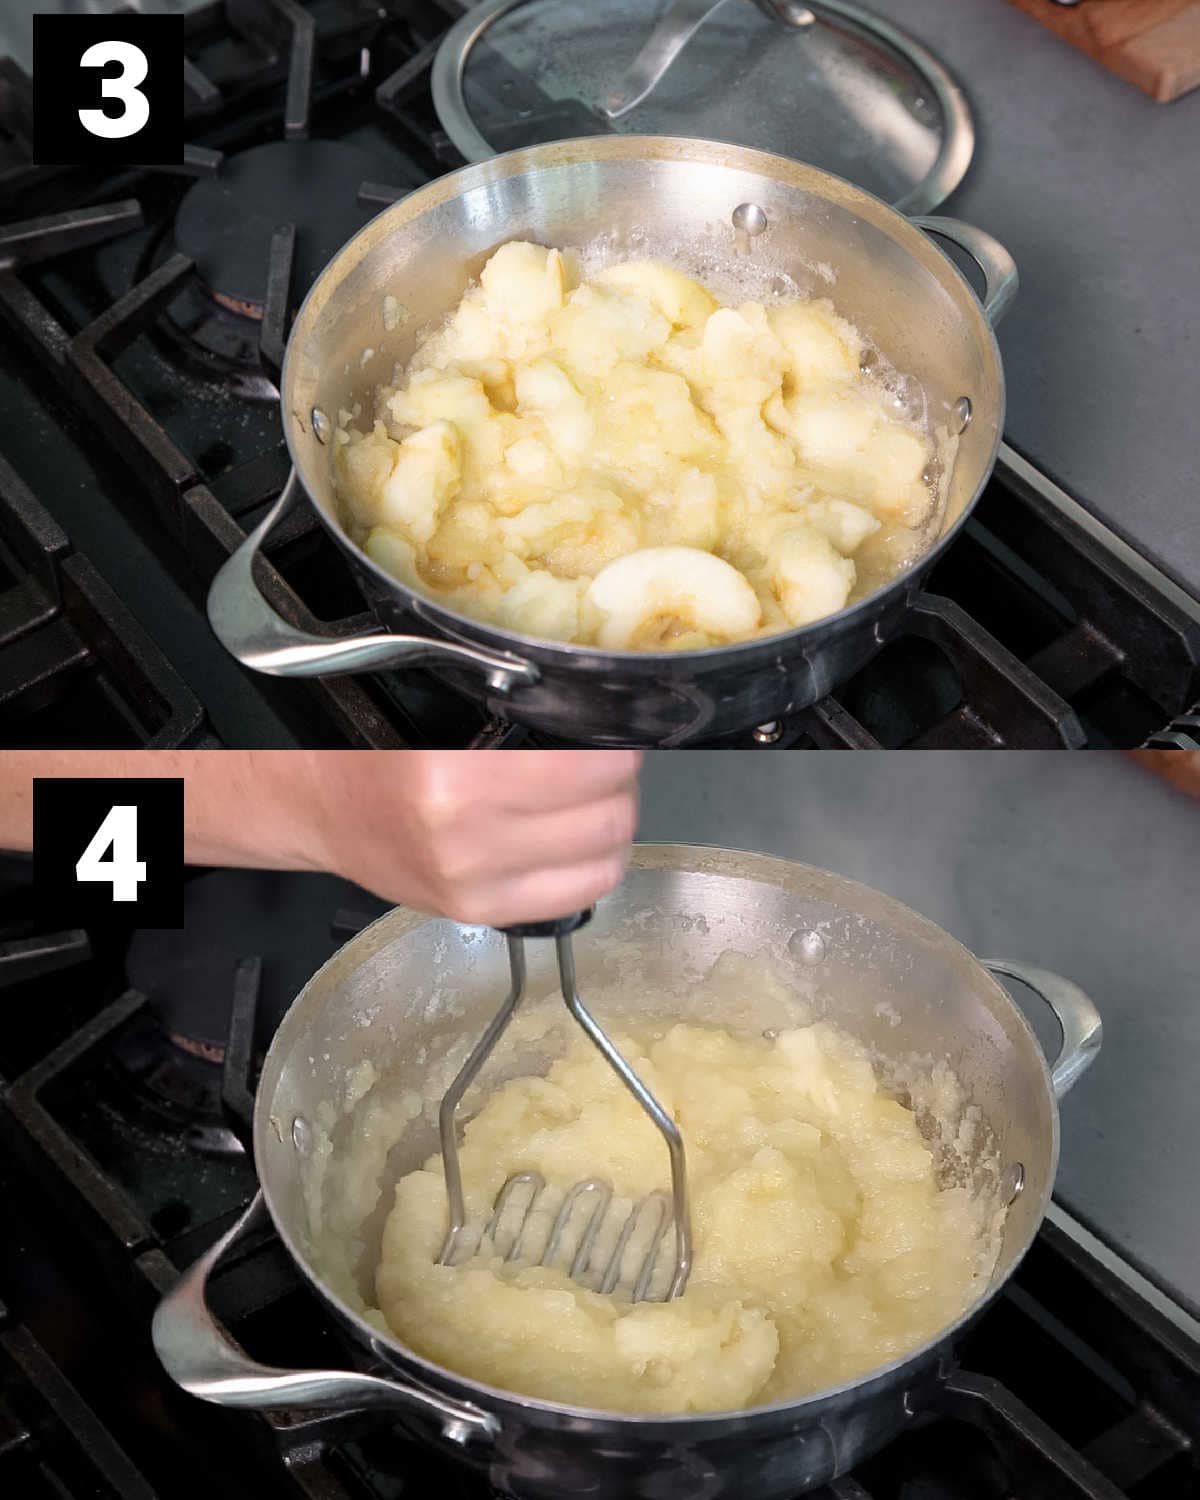 simmering the apples and mashing the sauce with a potato masher